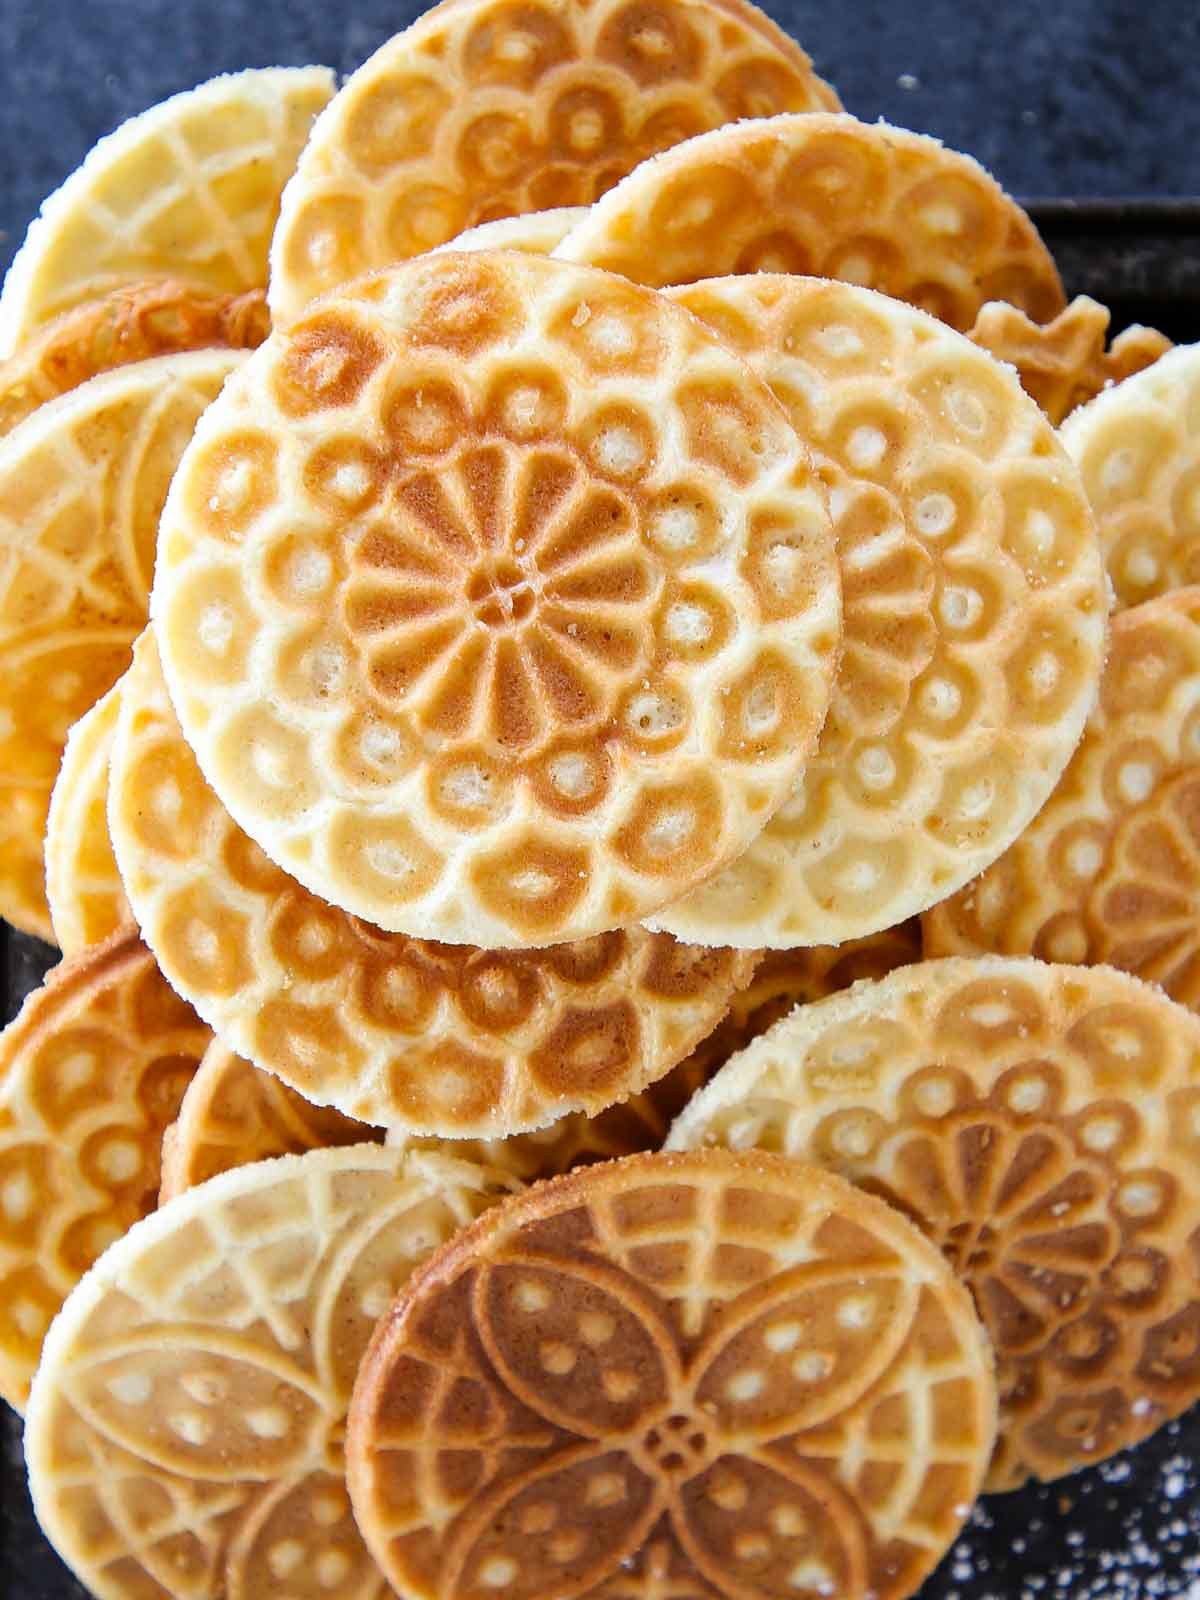 pizzelle cookies piled on a black tray.